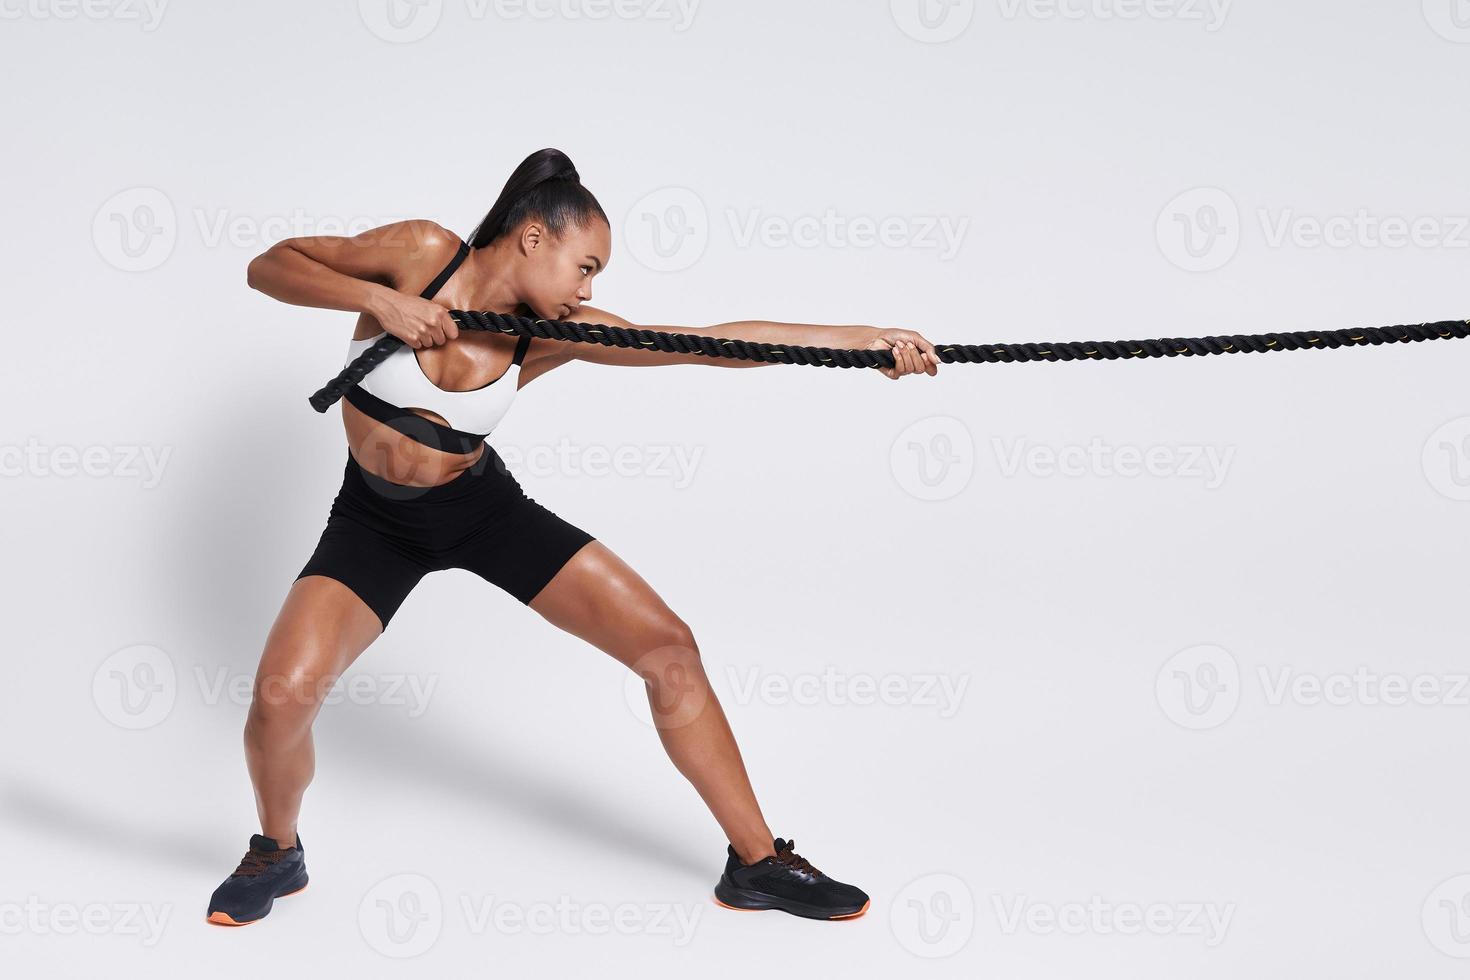 Rope Pulling Beautiful Image & Photo (Free Trial)